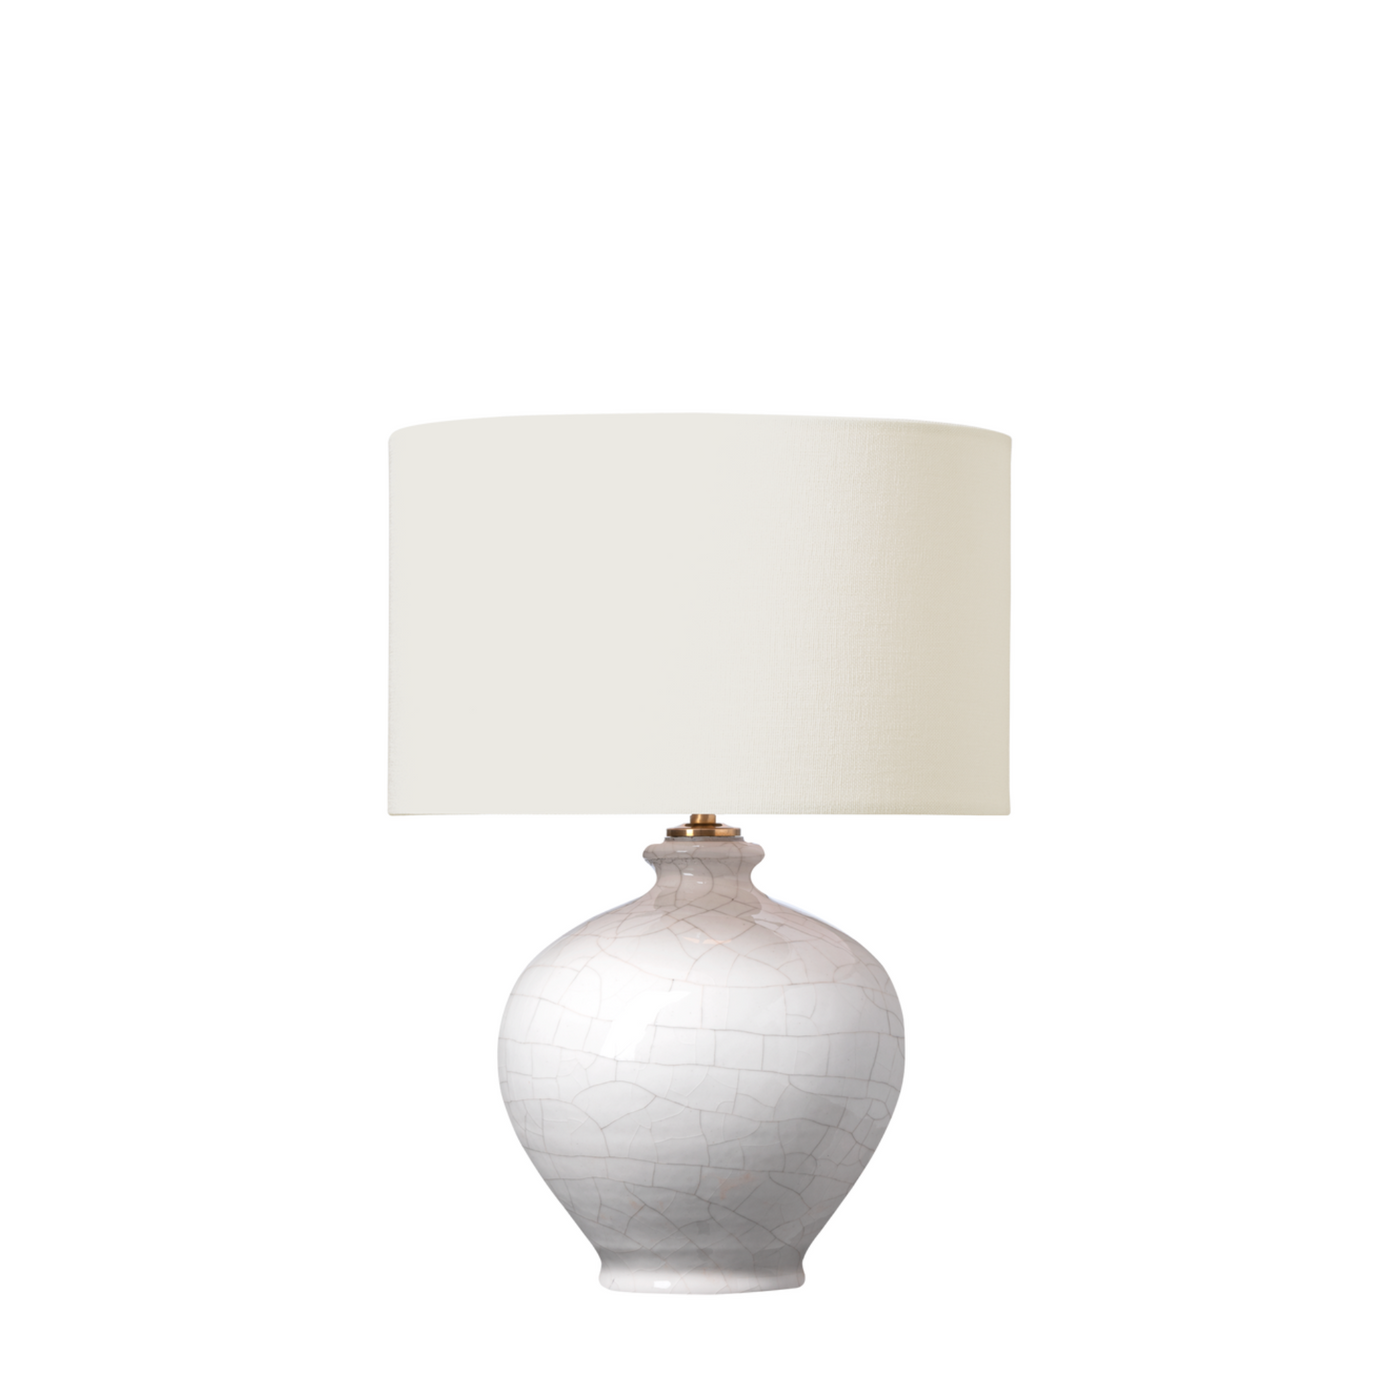 Gaios 13" Wireless Accent Table Lamp | Newport Lamp And Shade | Located in Newport, RI